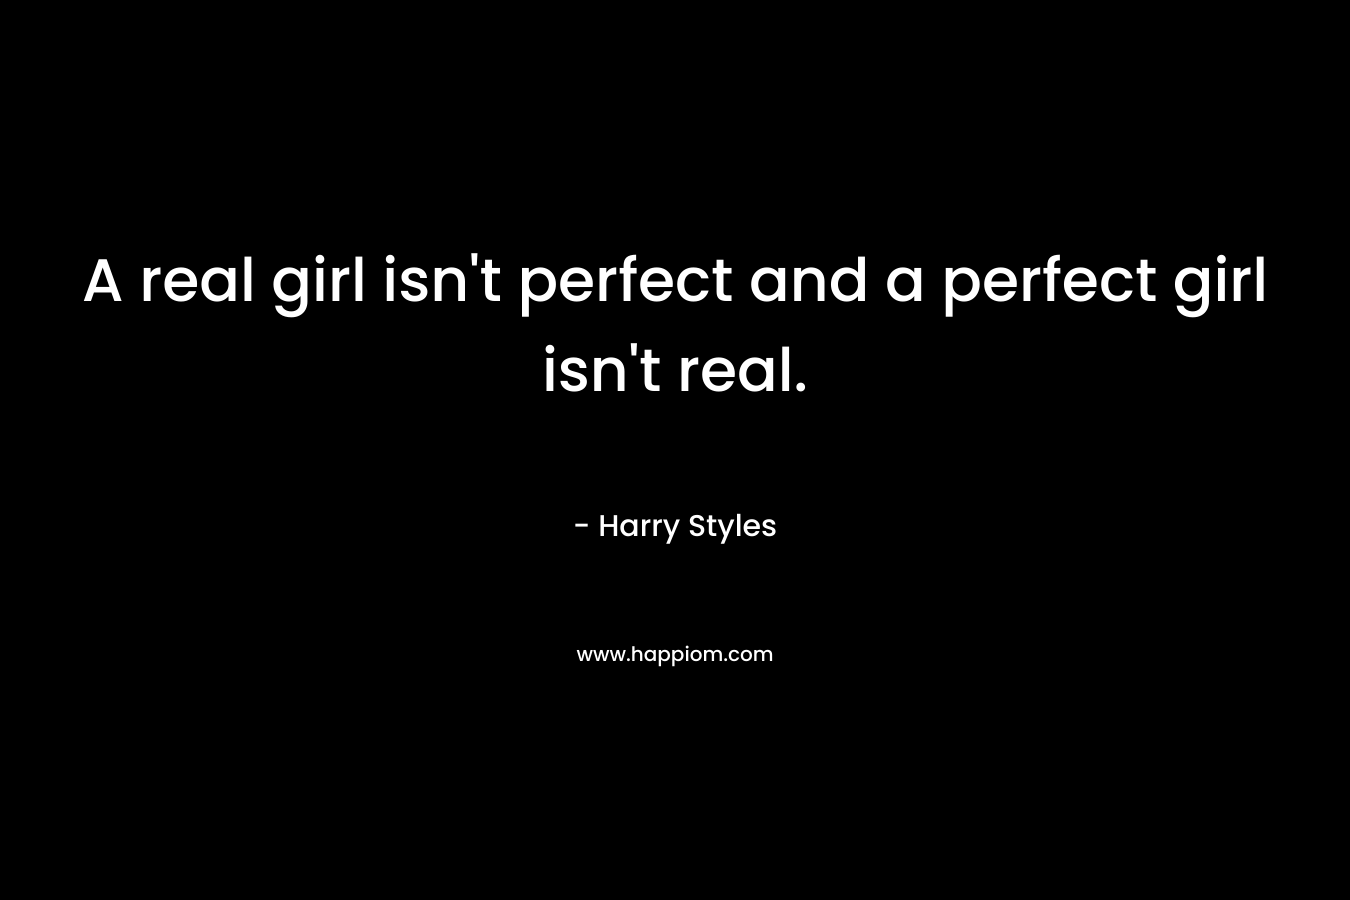 A real girl isn’t perfect and a perfect girl isn’t real. – Harry Styles